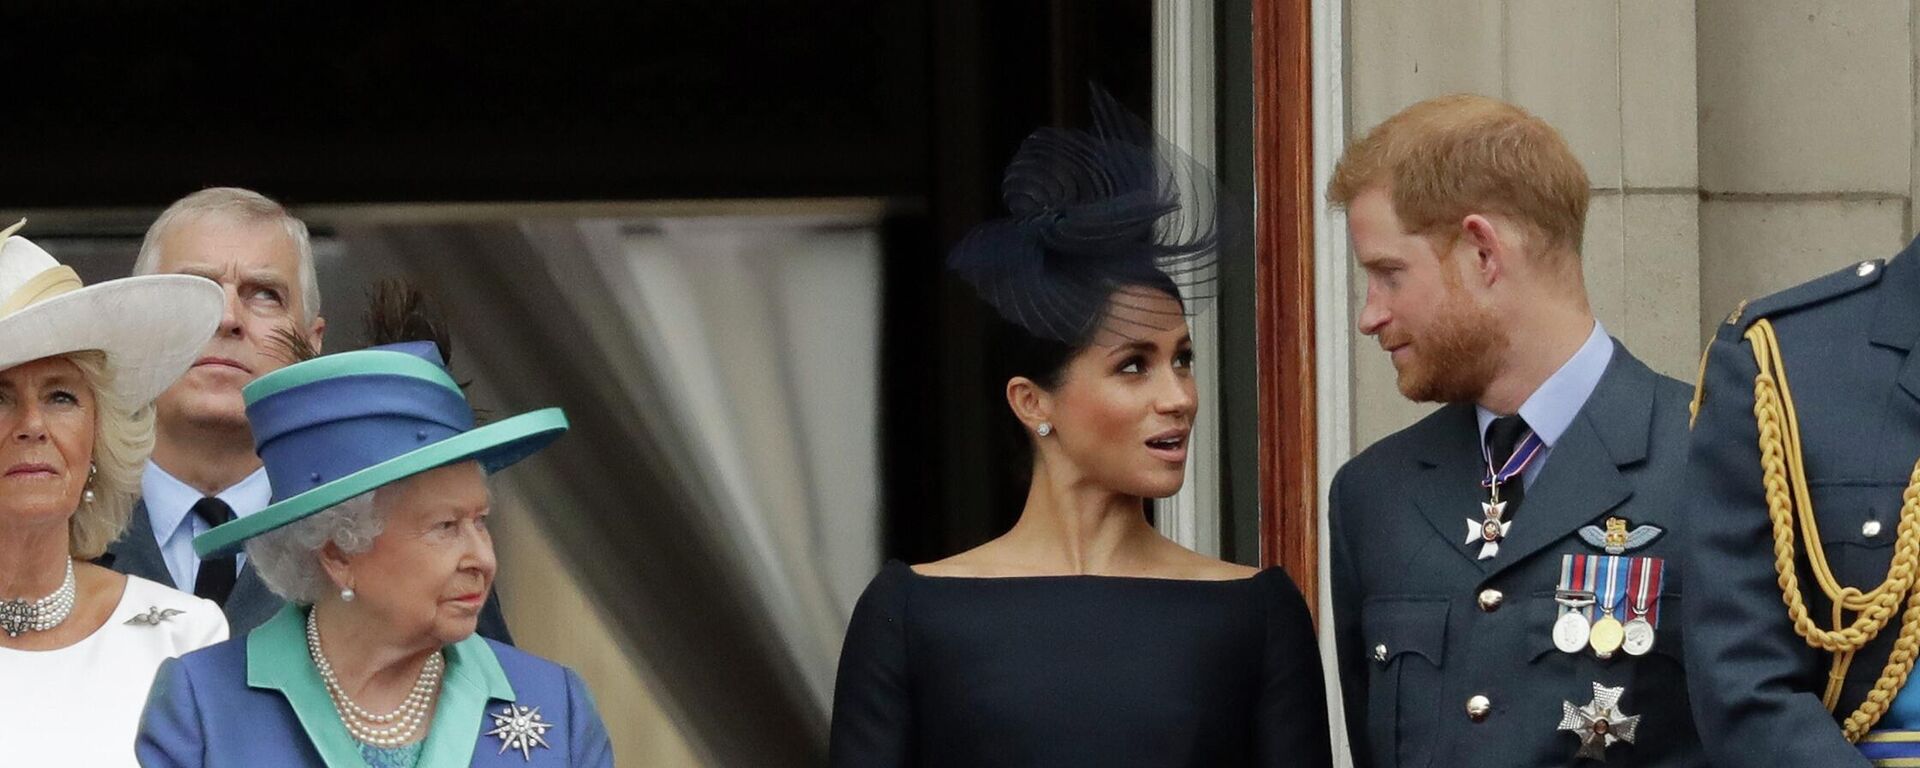 In this Tuesday, July 10, 2018 file photo Britain's Queen Elizabeth II, Meghan the Duchess of Sussex and Prince Harry stand on a balcony to watch a flypast of Royal Air Force aircraft pass over Buckingham Palace in London. - Sputnik International, 1920, 07.05.2022